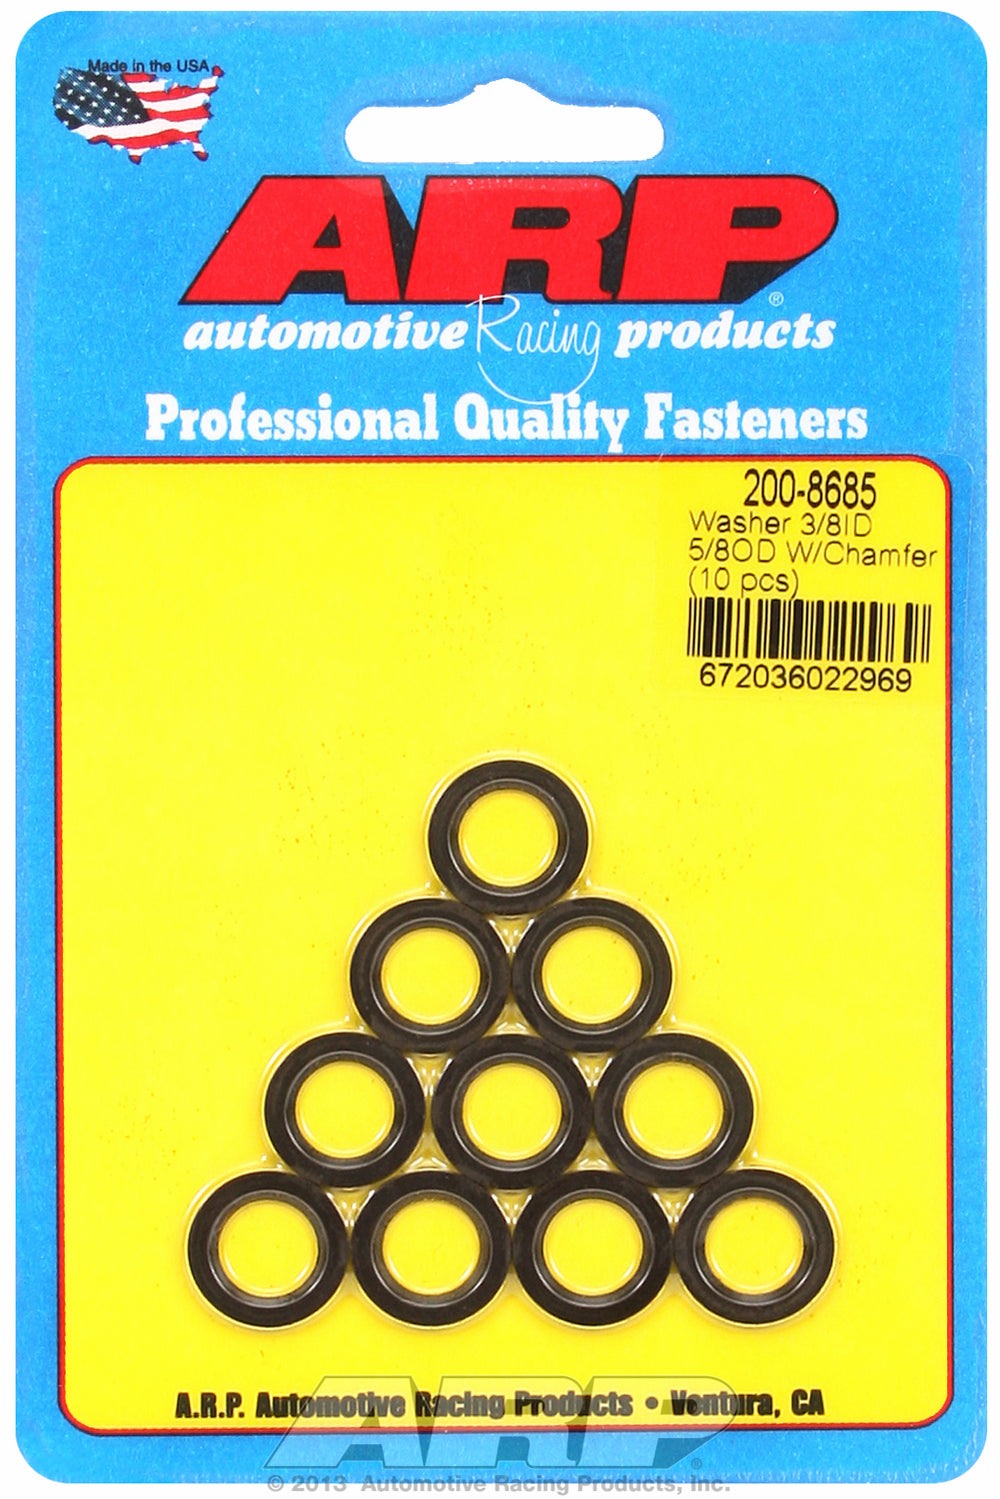 Black Oxide 10-PC PackSAE Special Purpose Washers w/ Chamfer